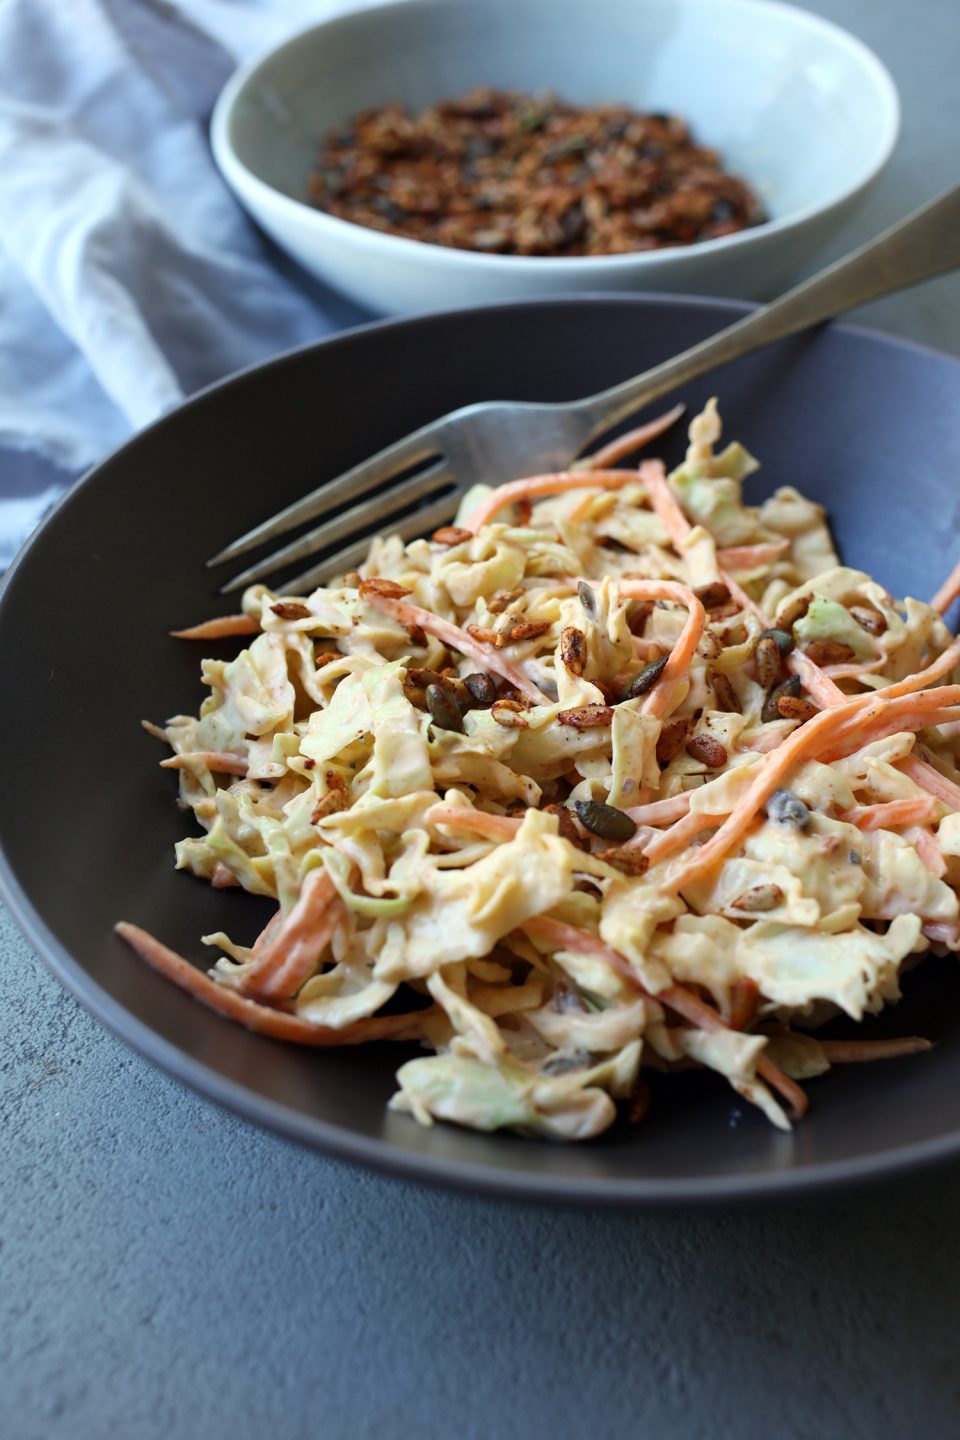 Curry Coleslaw with Spicy Seeds